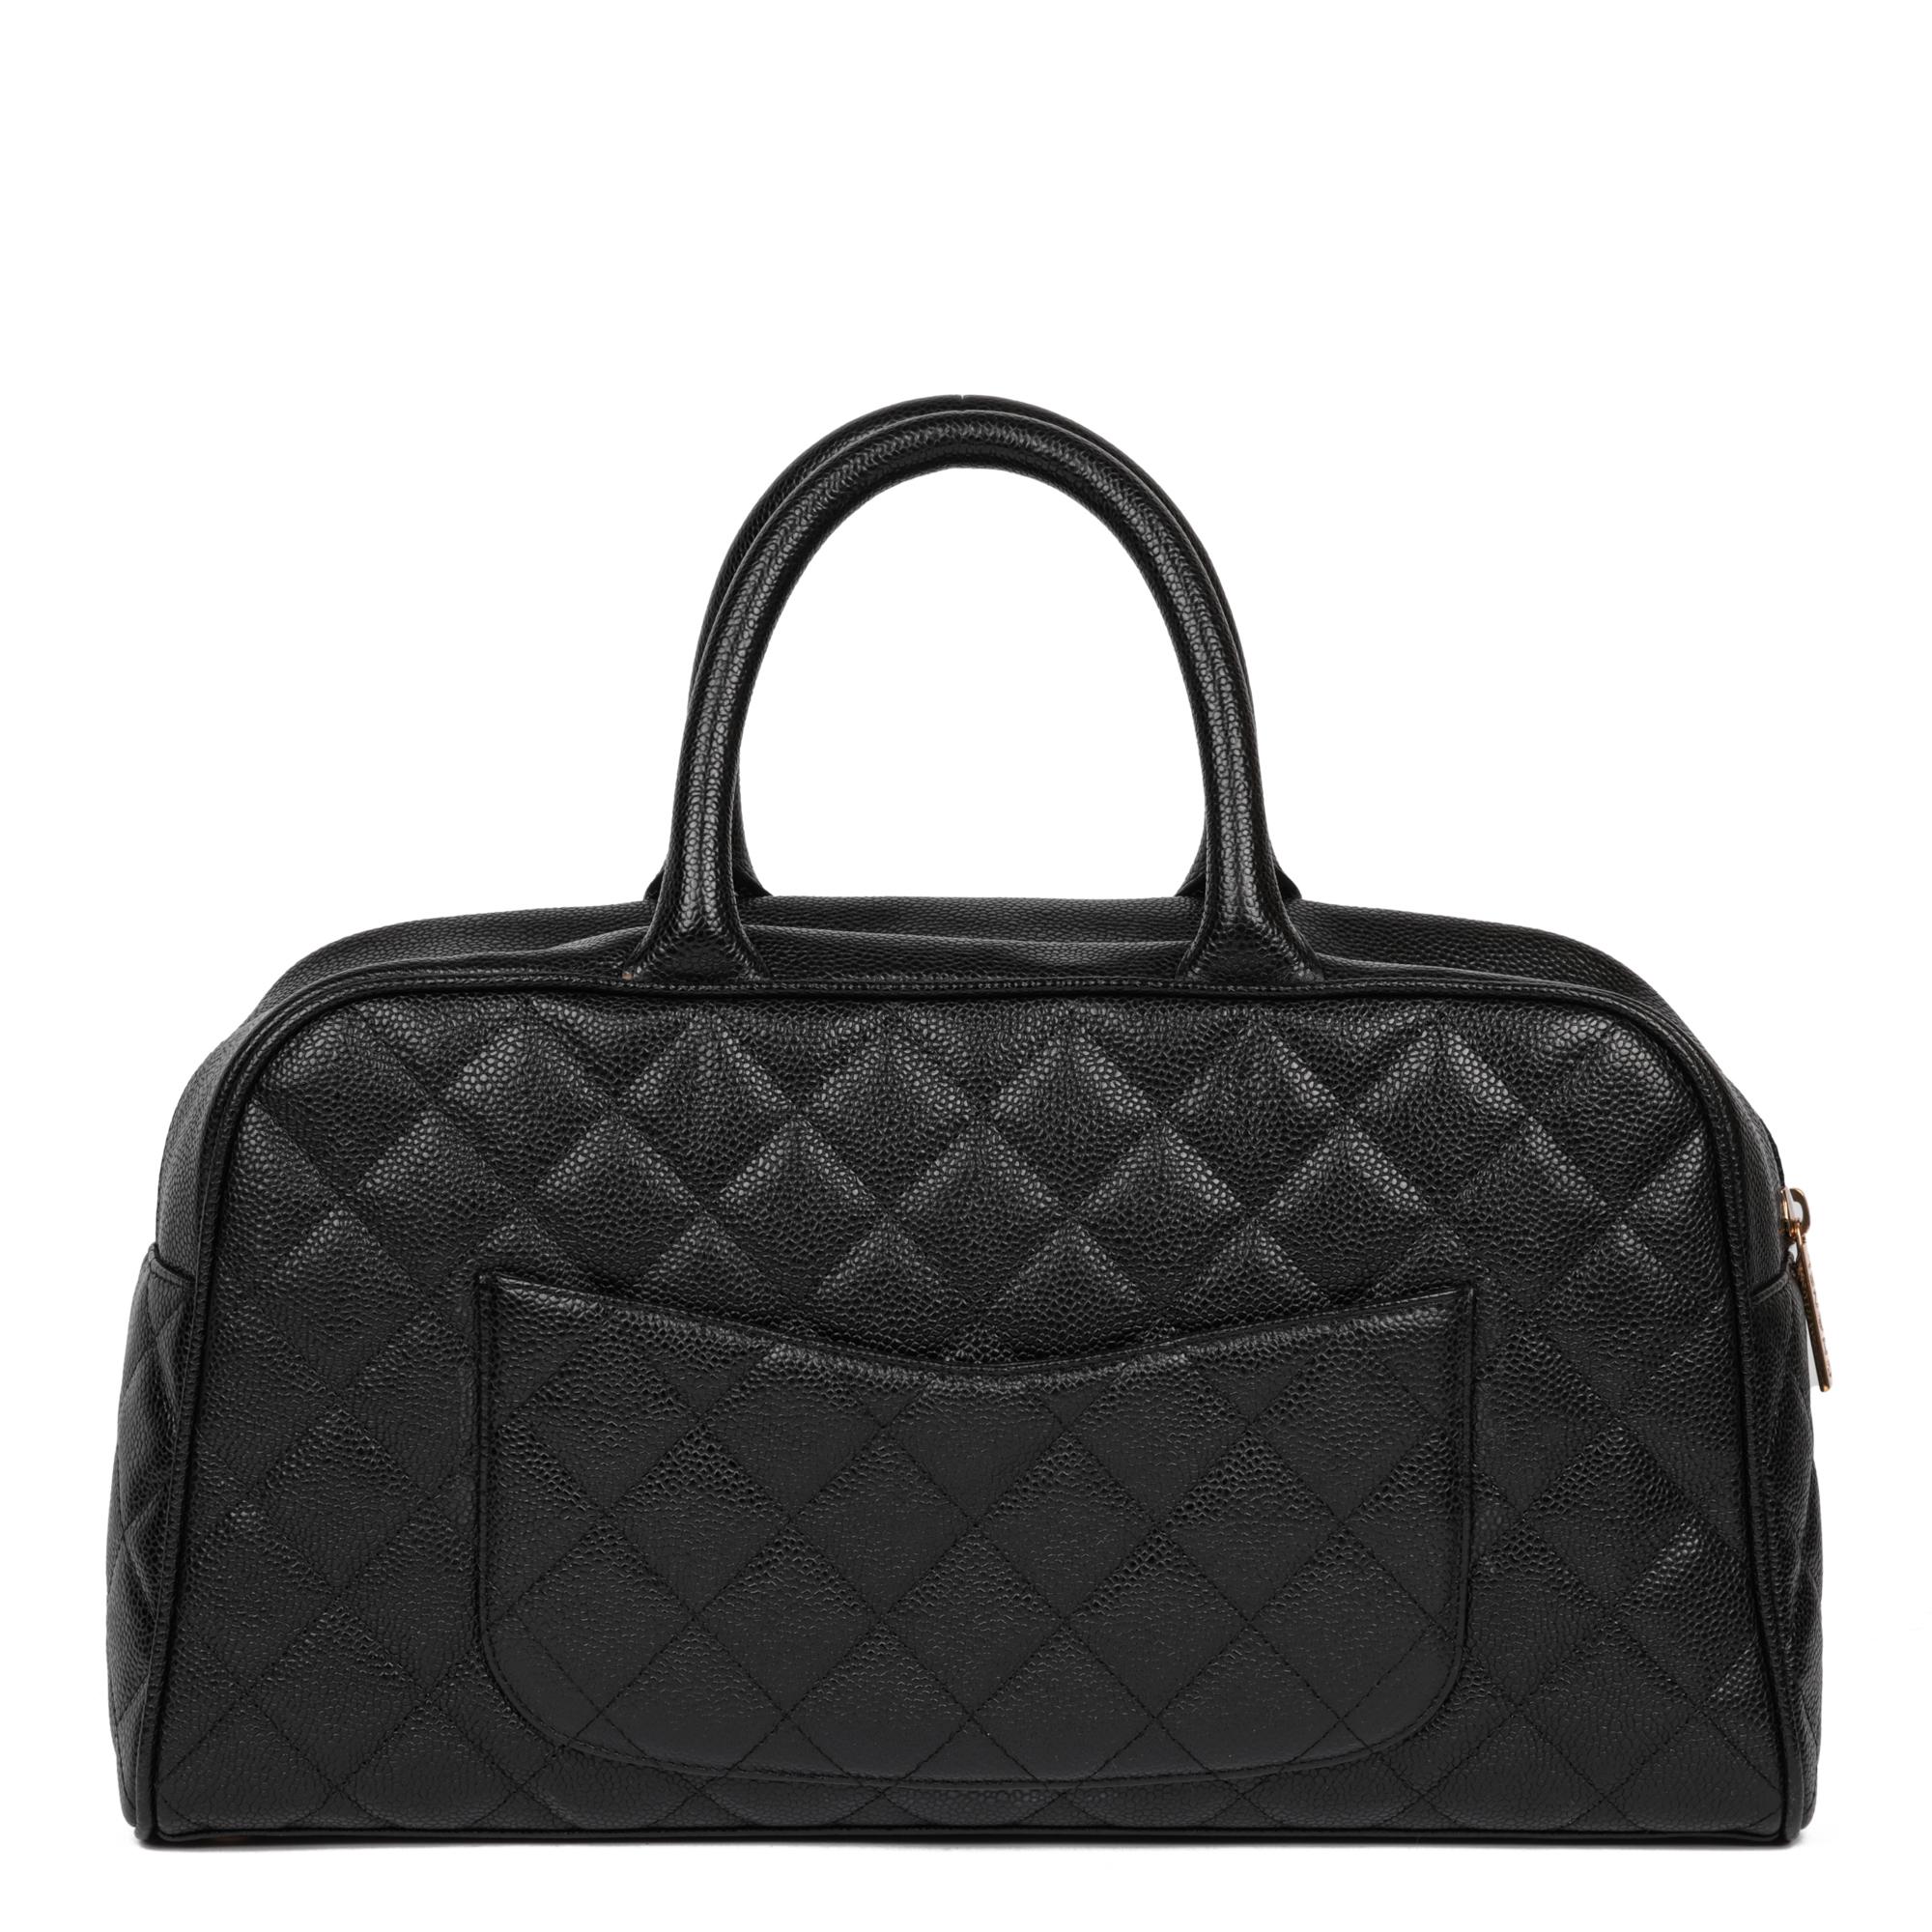 Women's CHANEL Black Quilted Caviar Leather Boston Bag